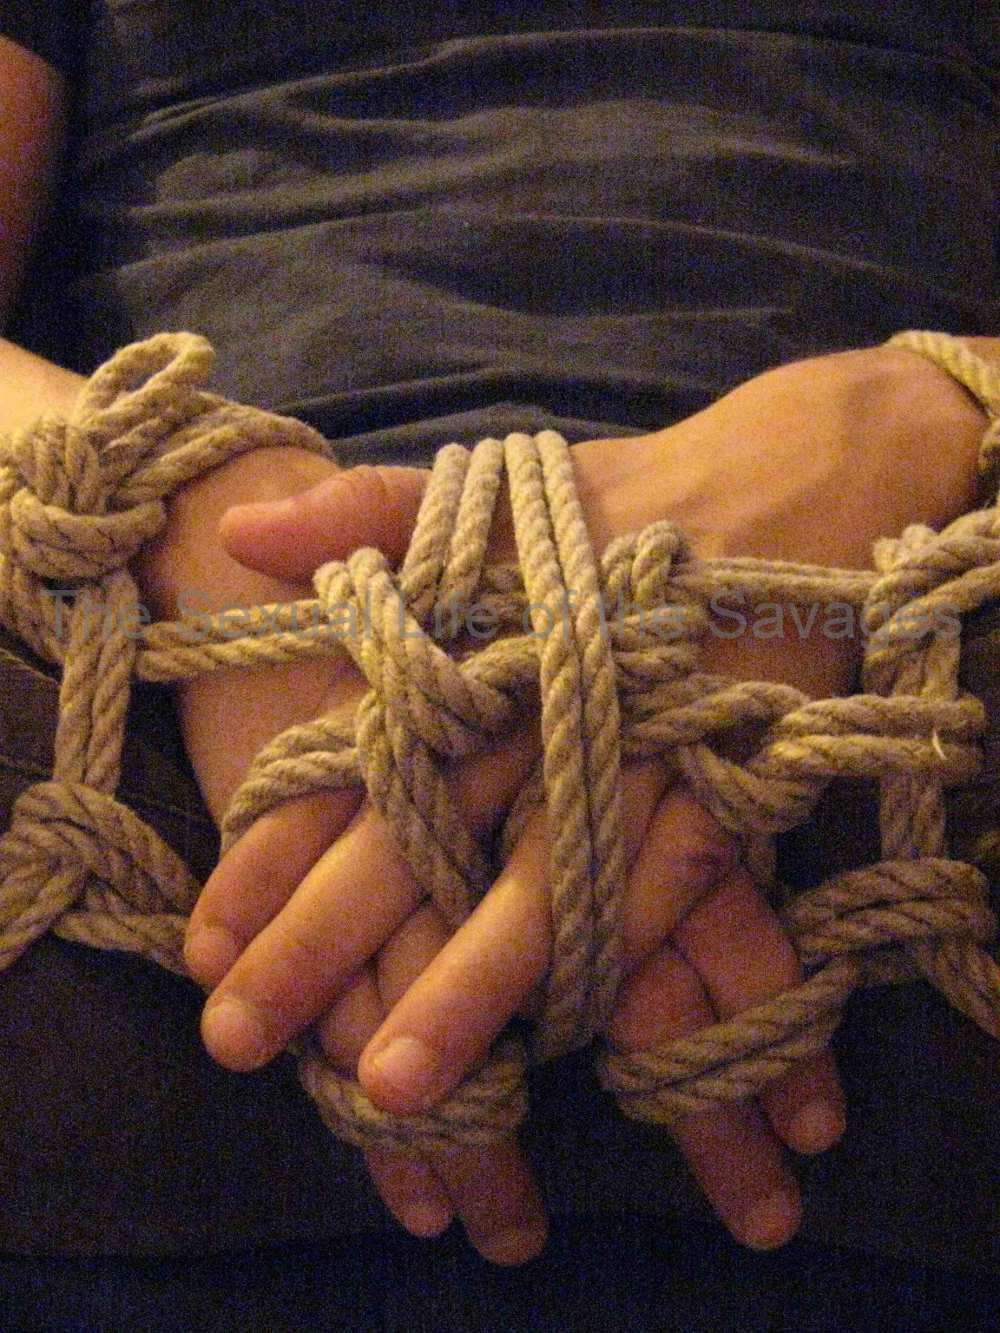 Antidote hands tied up, model Lun Ario